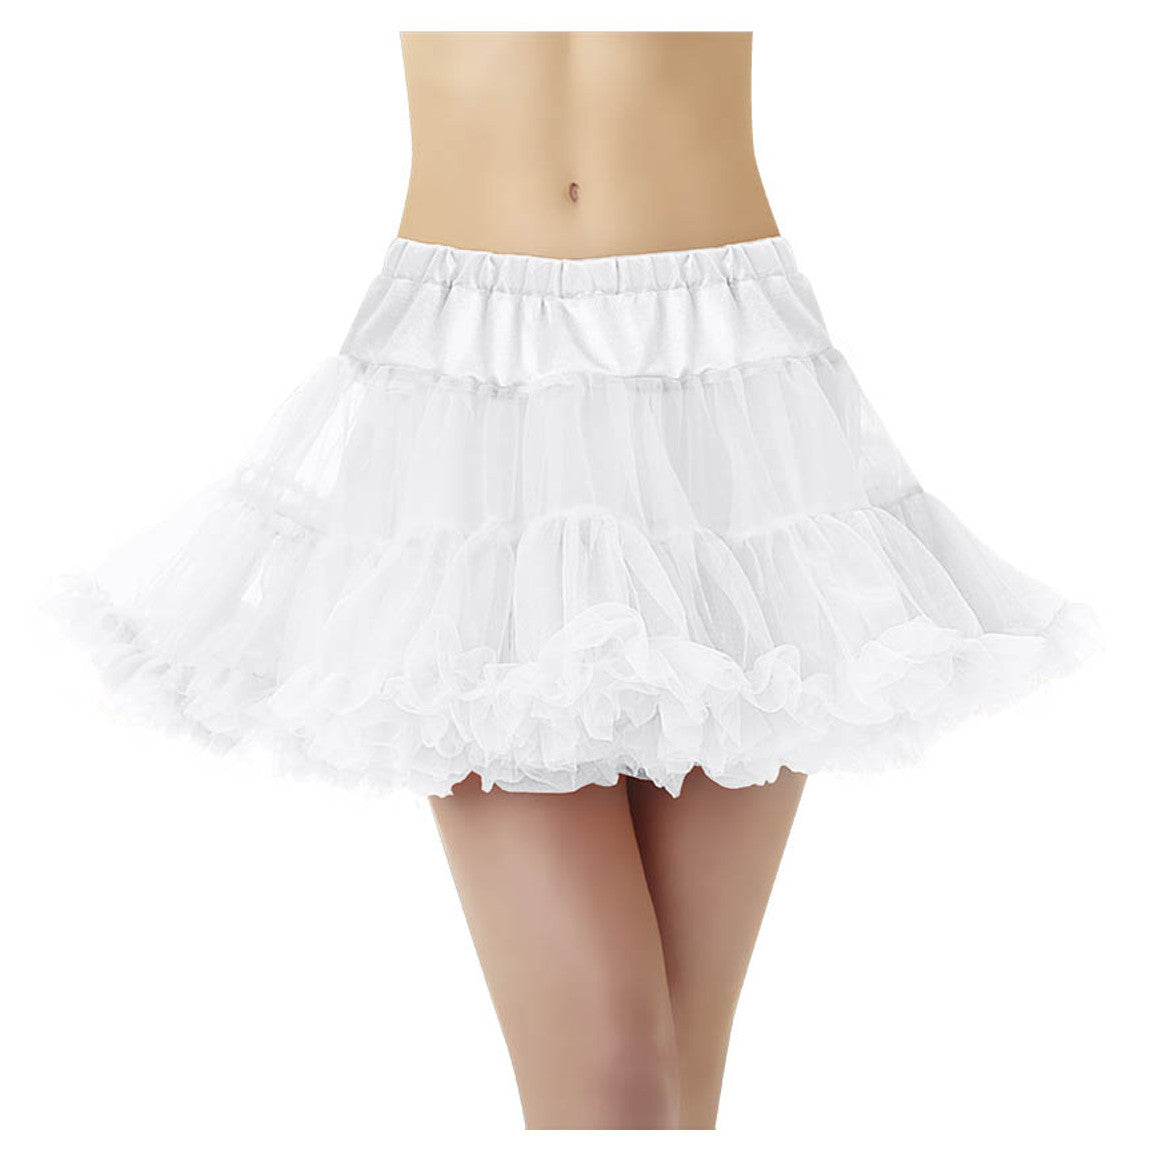 Adult Full White Petticoat XL Costumes & Apparel - Party Centre